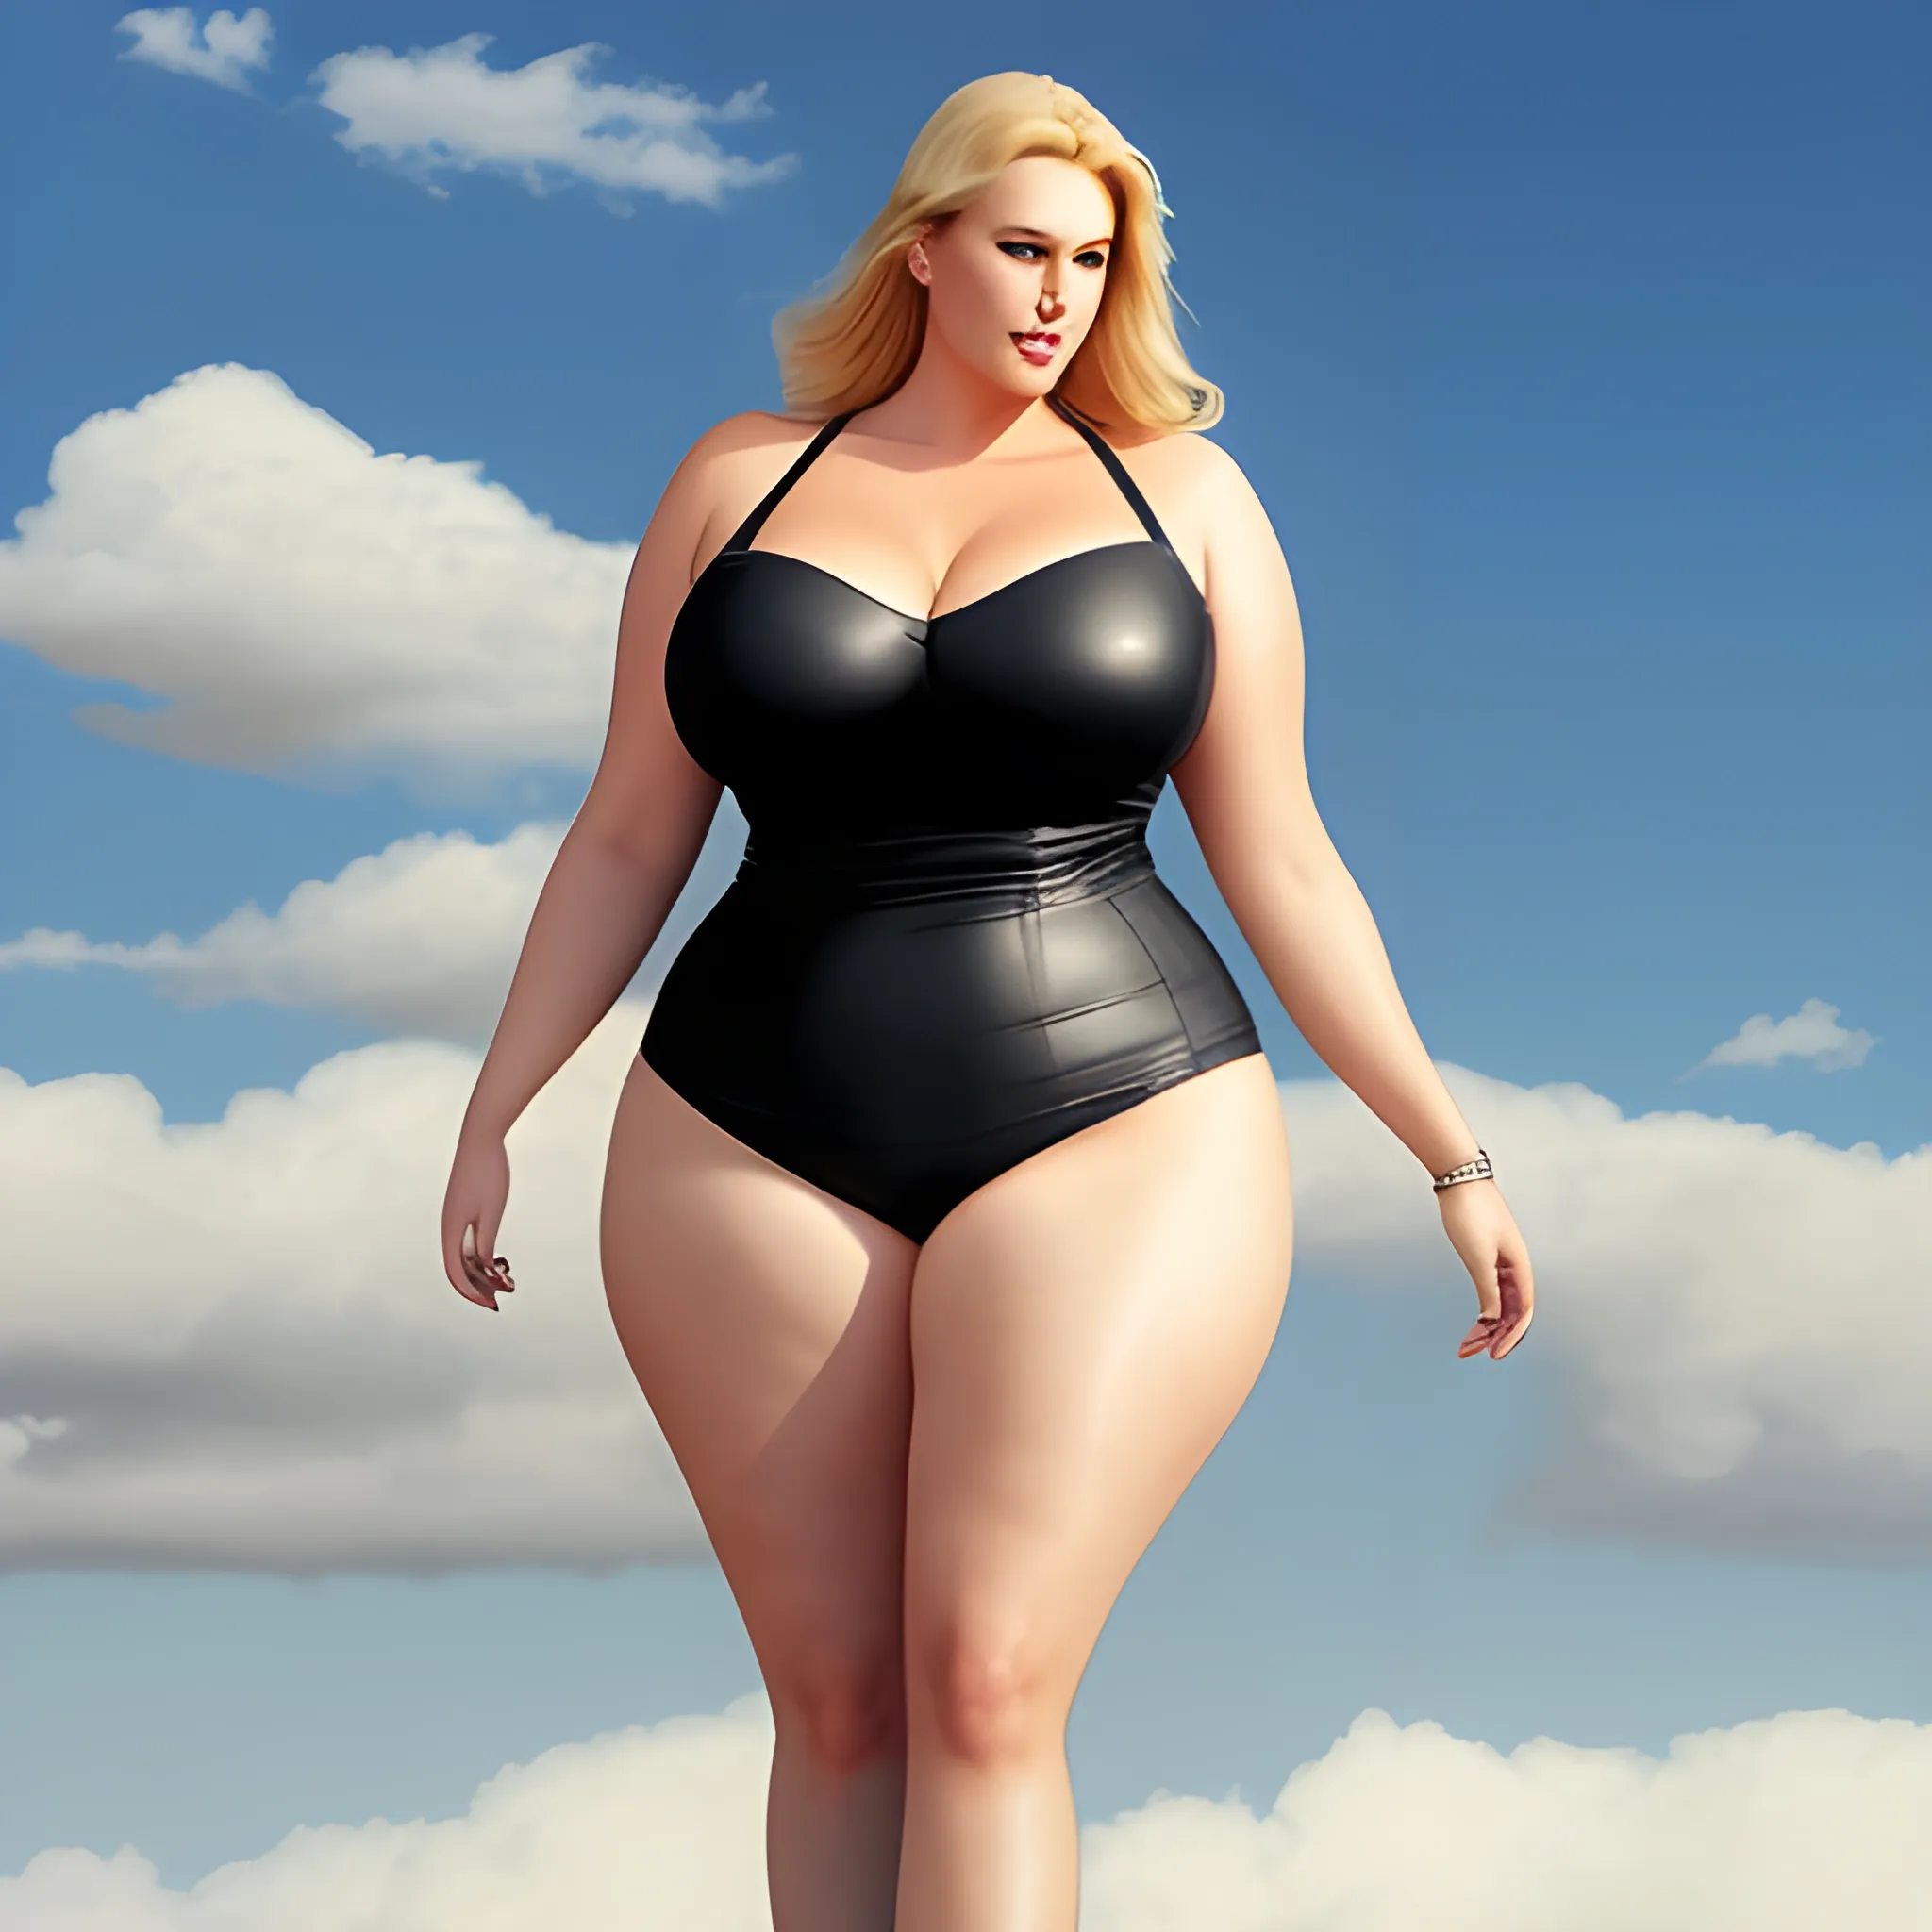 large and tall blonde plus size, not curvy girl with small head